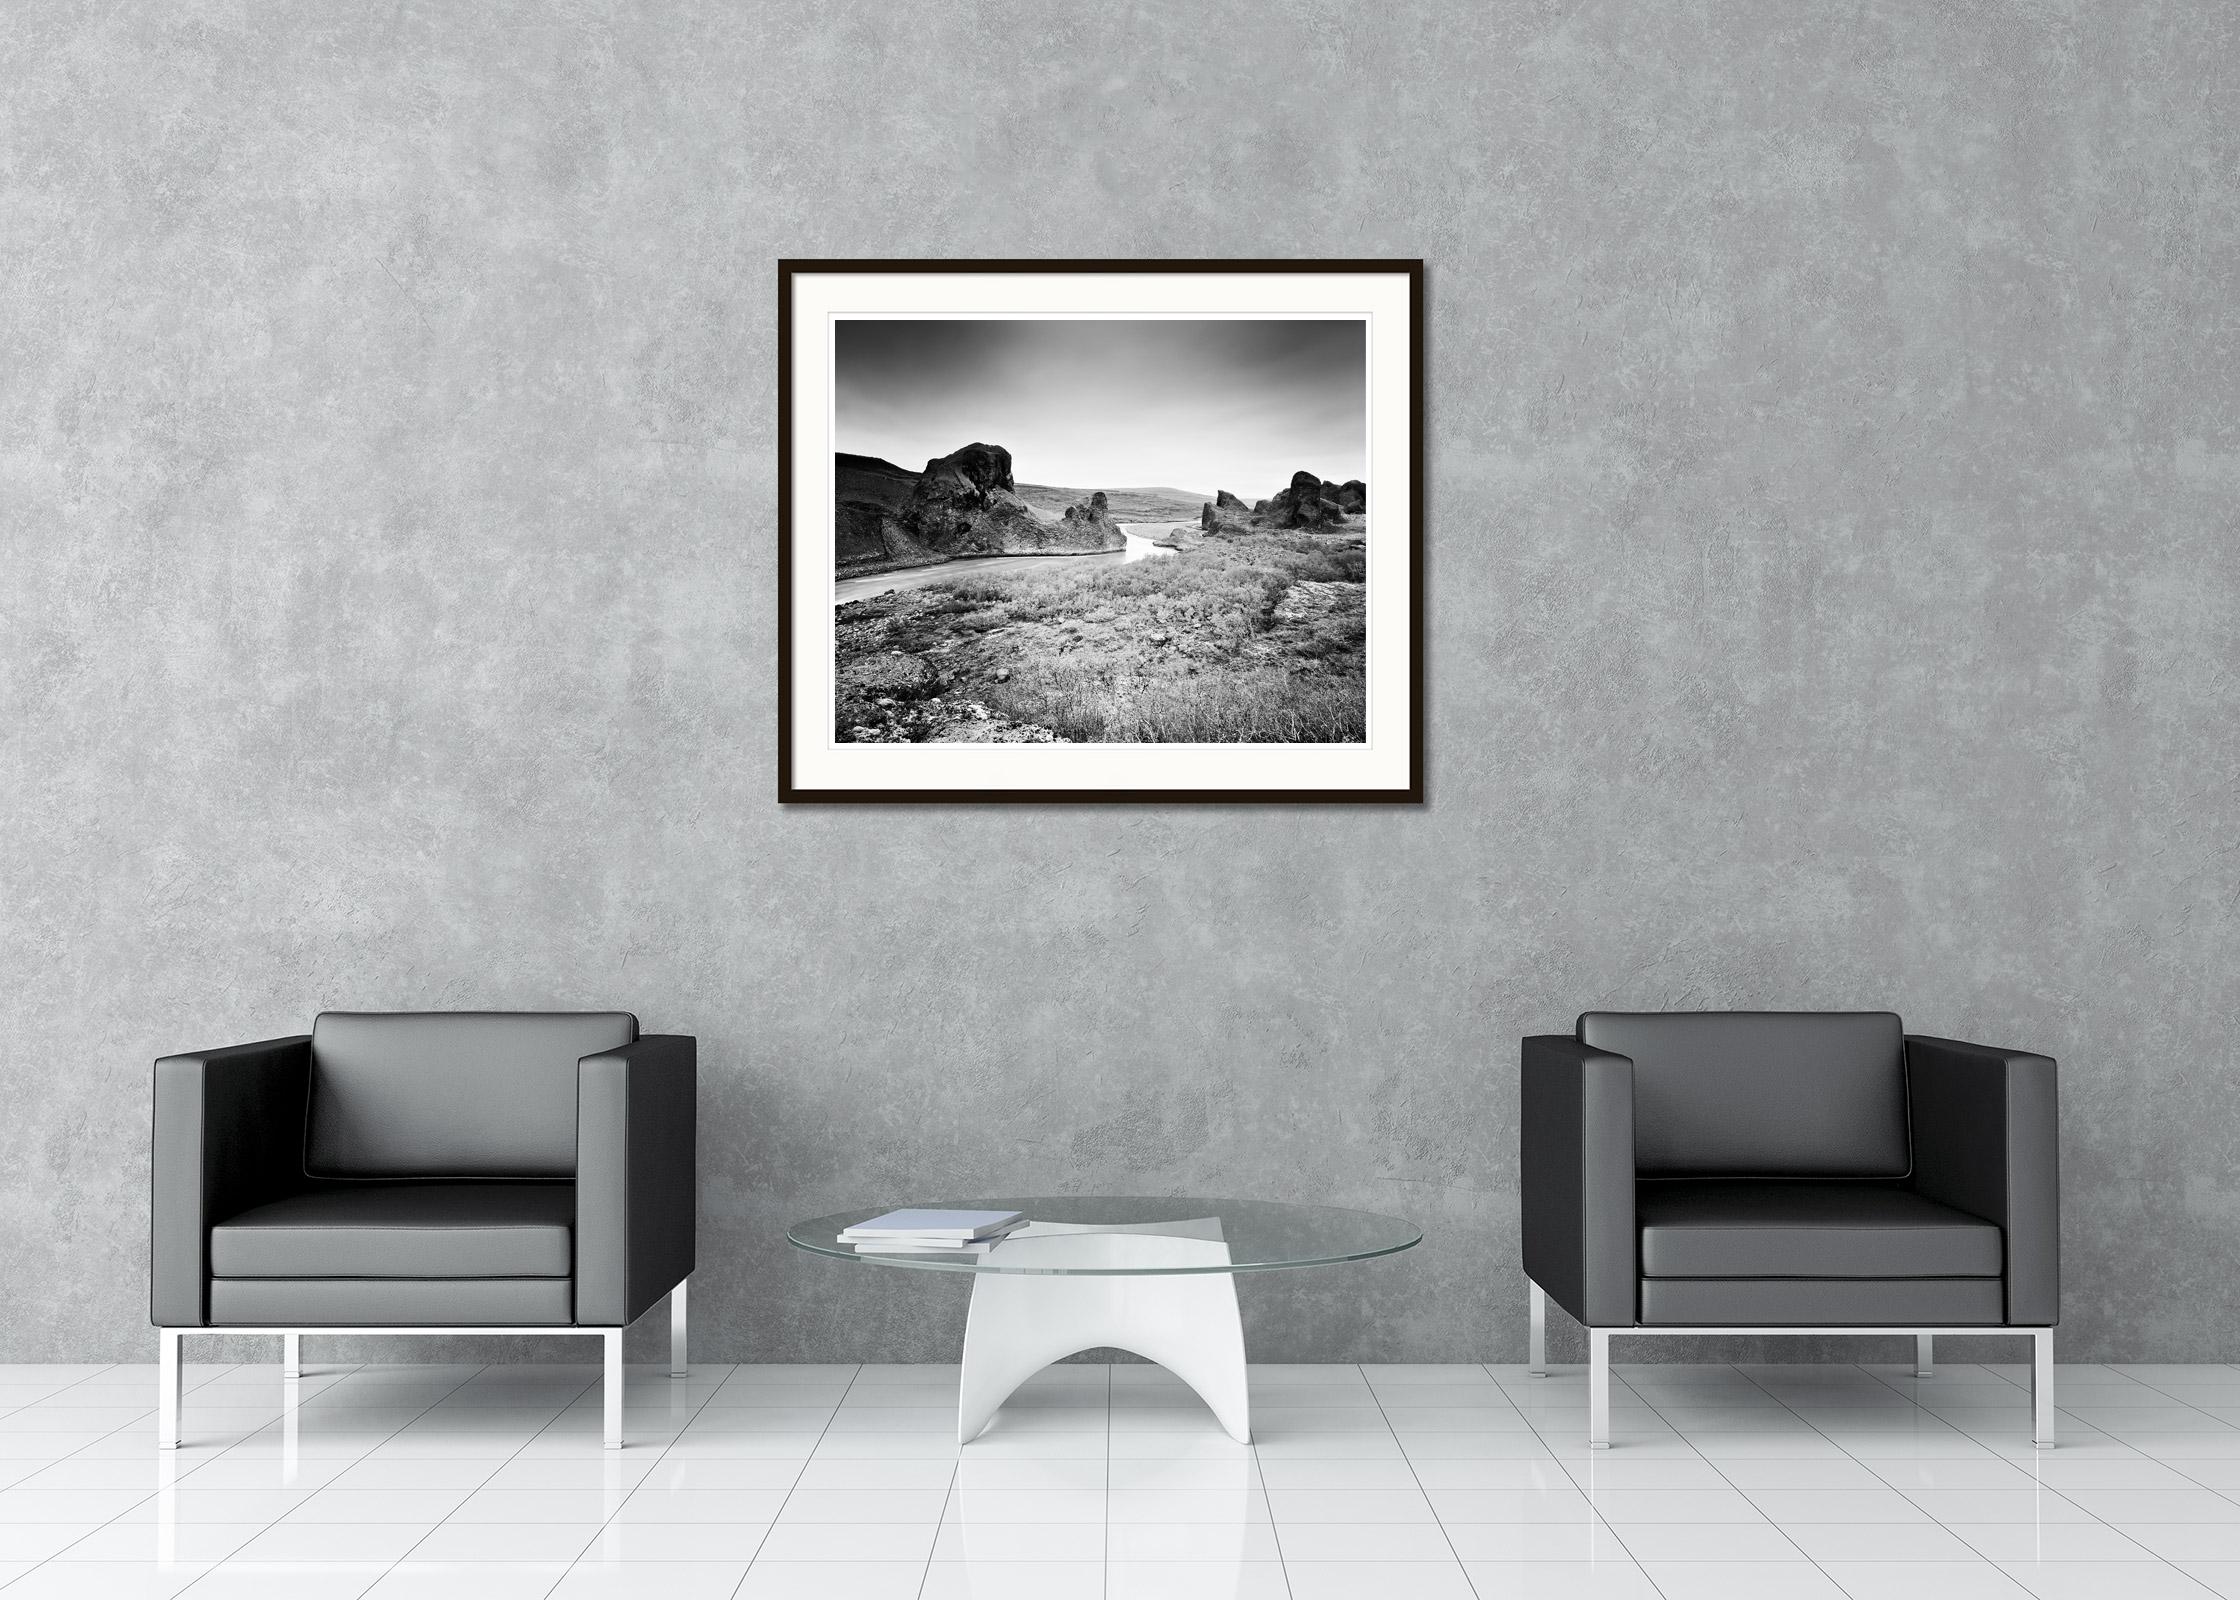 Follow Rivers, Iceland, black and white fine art photography, landscape - Contemporary Photograph by Gerald Berghammer, Ina Forstinger